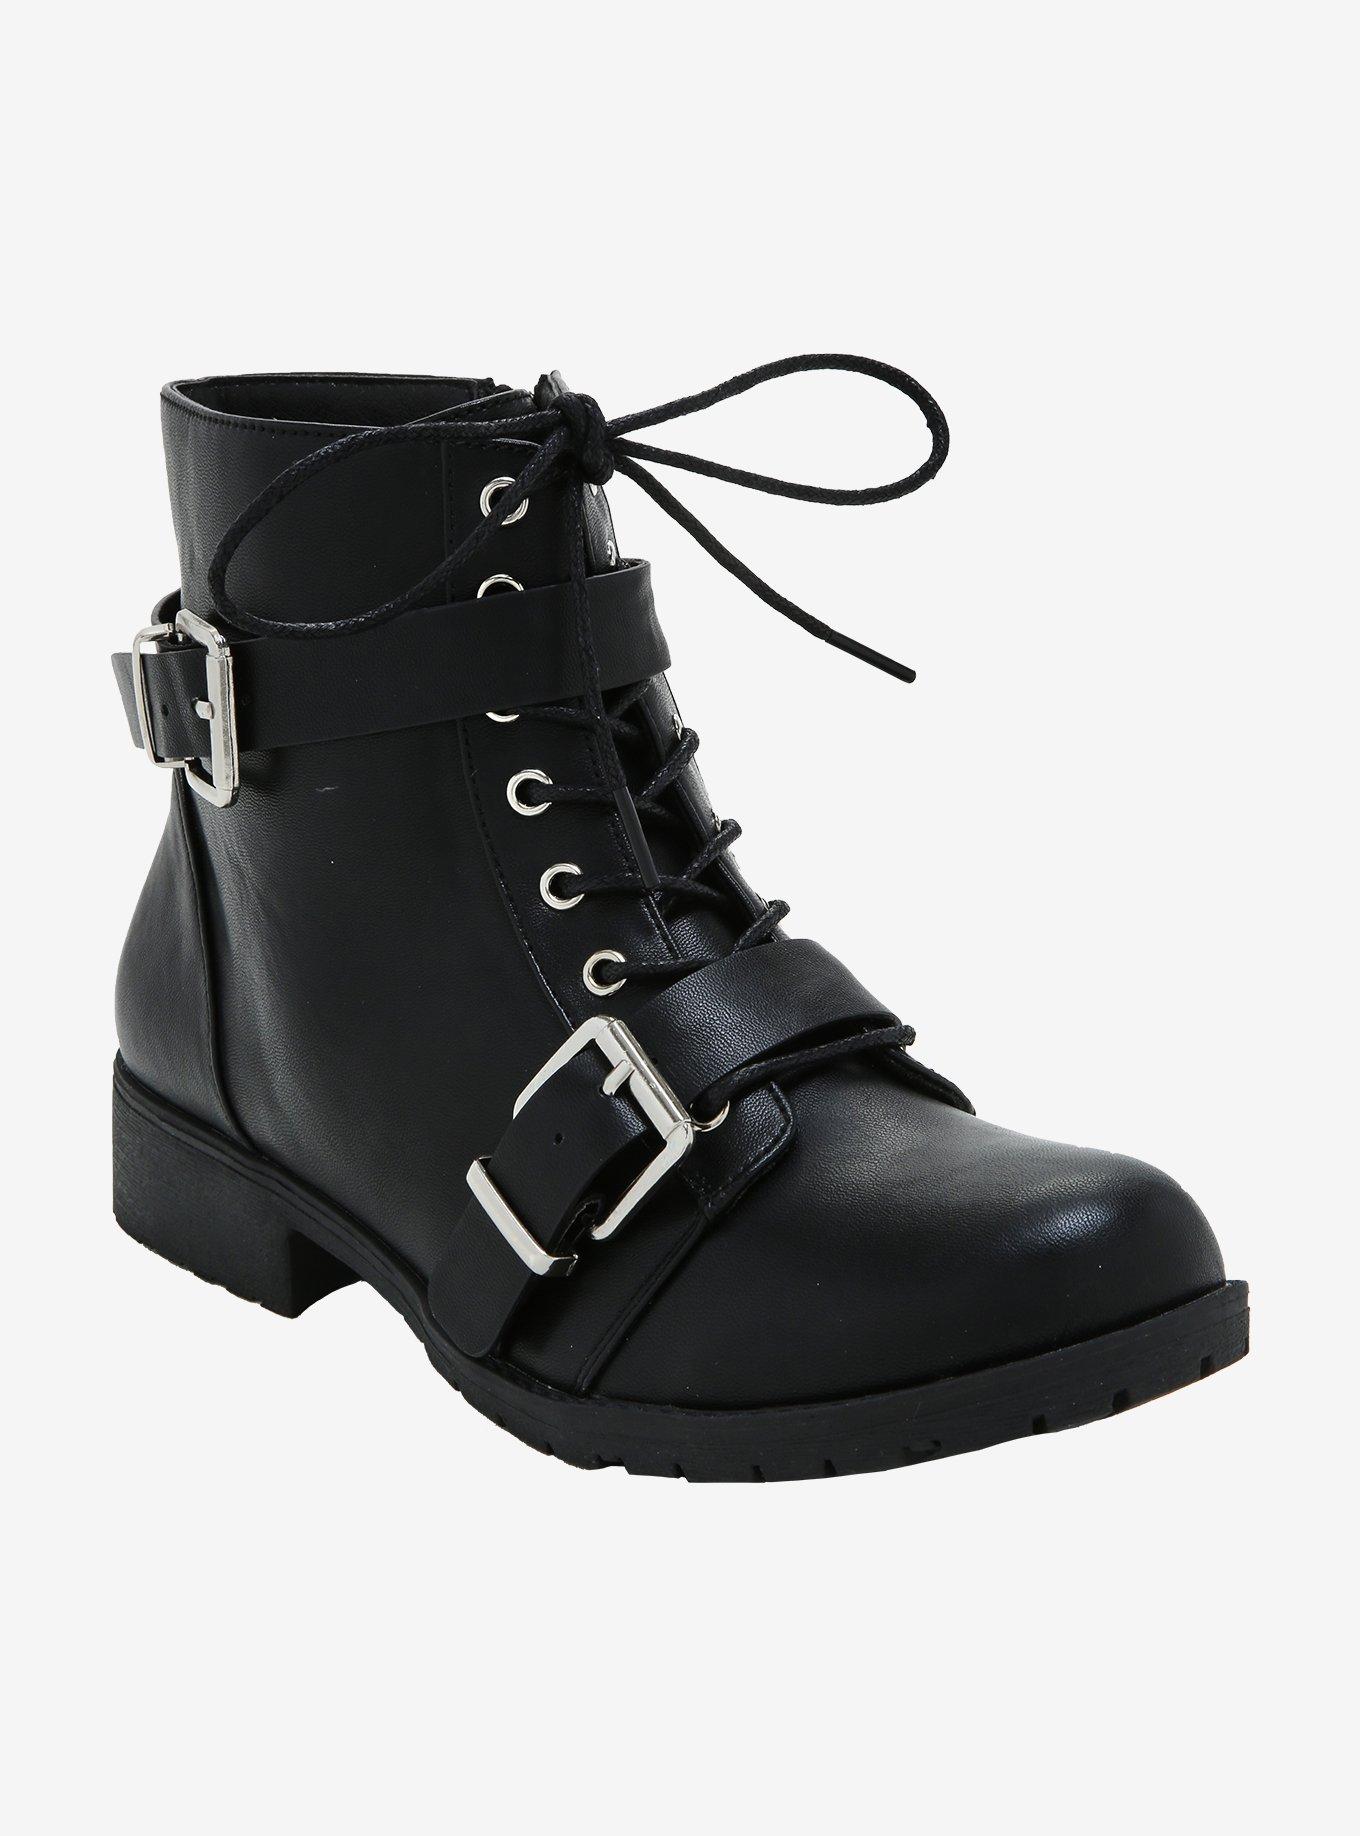 Mad House Buckle Boots, BLACK, hi-res